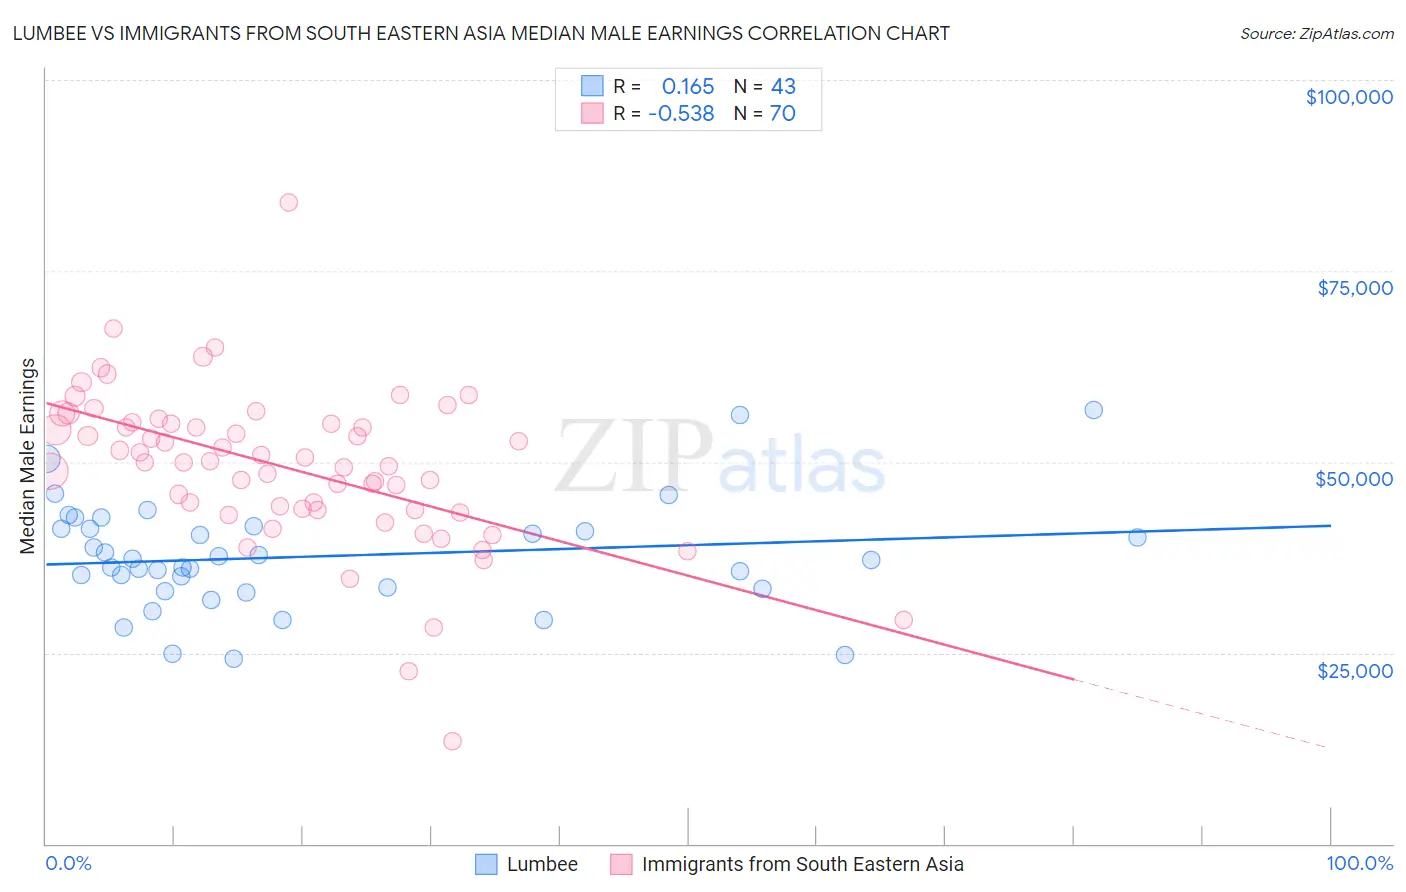 Lumbee vs Immigrants from South Eastern Asia Median Male Earnings